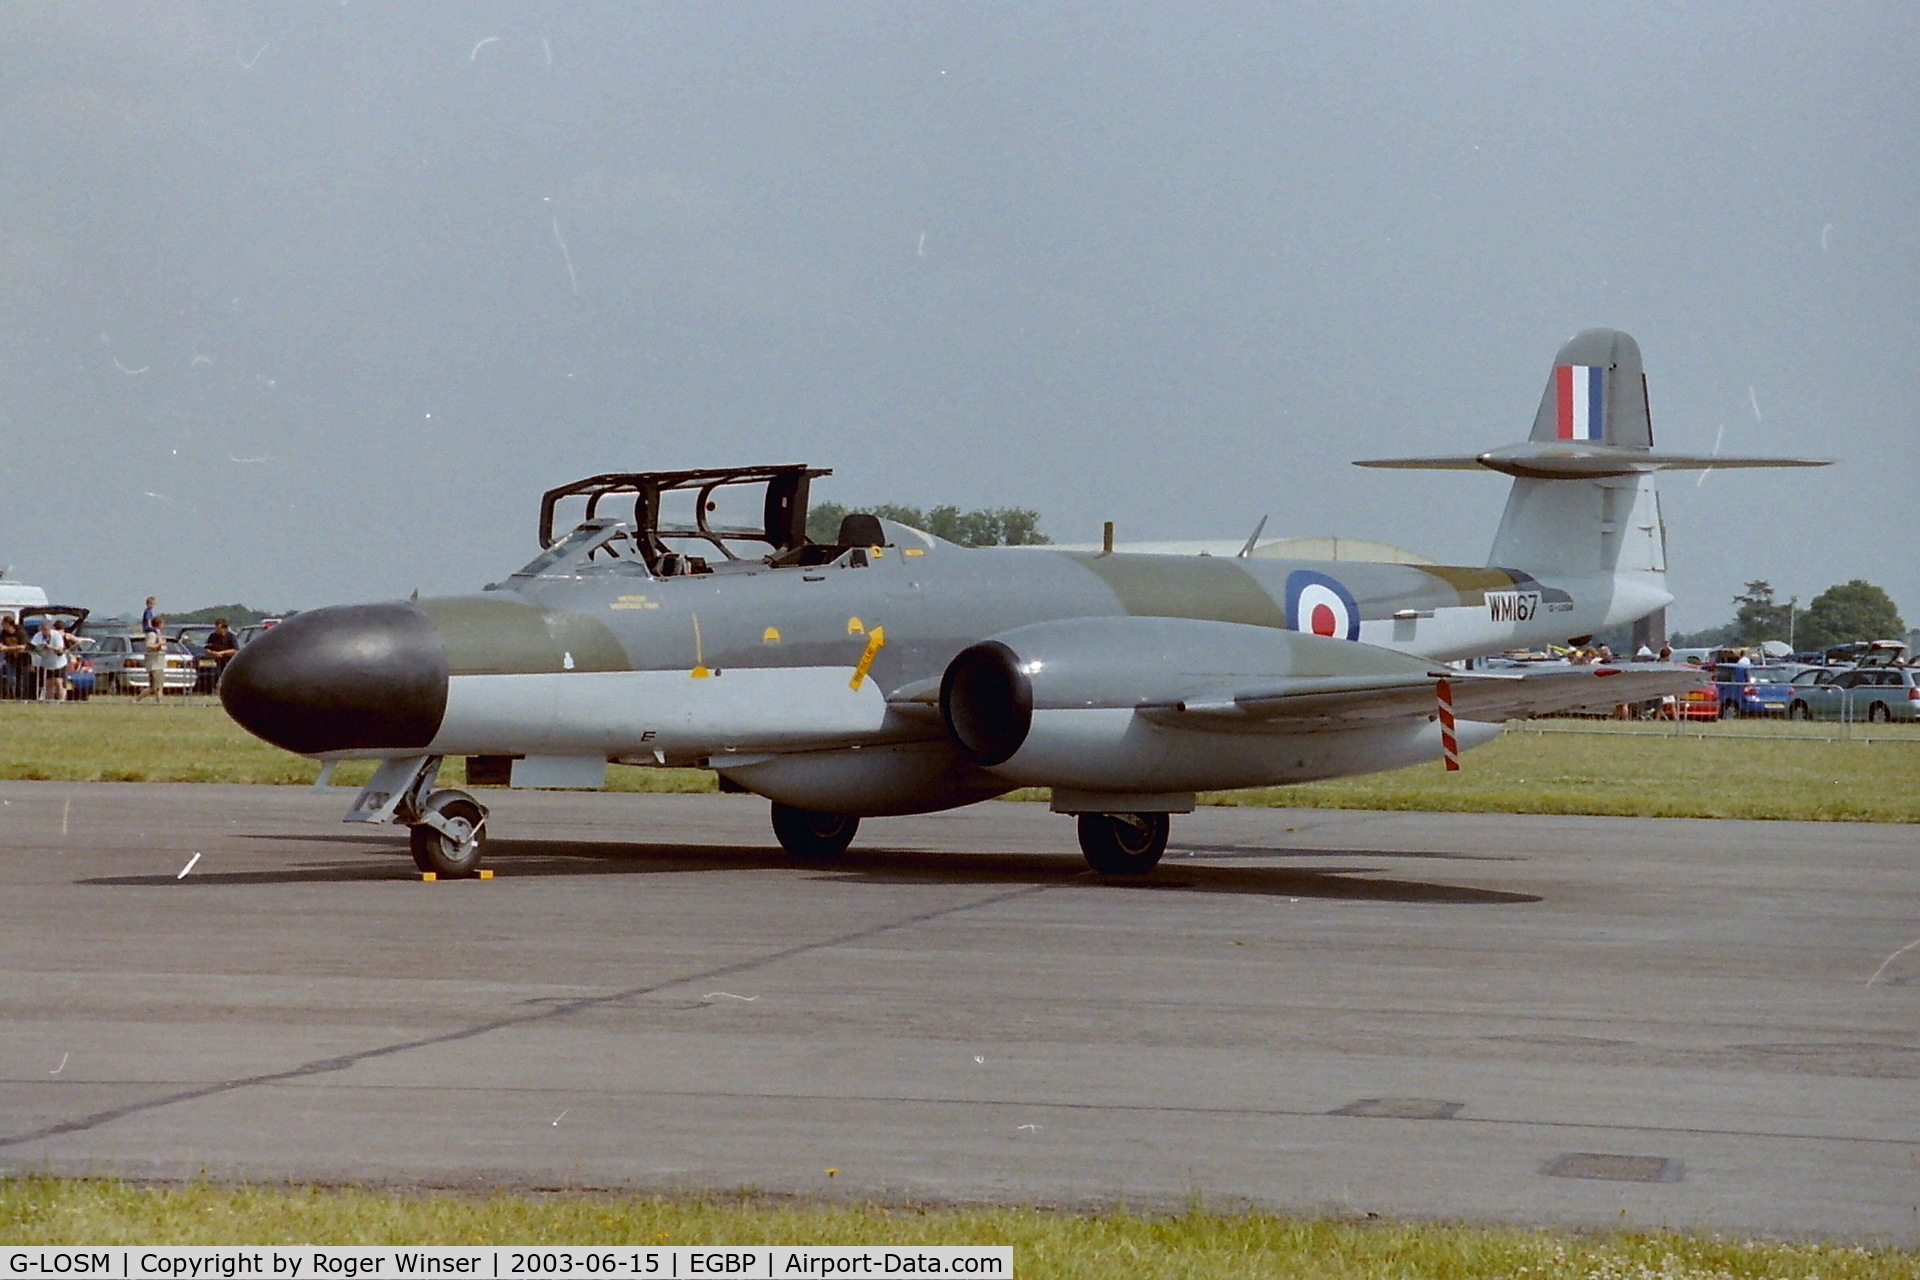 G-LOSM, 1952 Gloster Meteor NF.11 C/N S4/U/2342, Was WM167 in RAF service. At the Classic Jets Airshow, Kemble